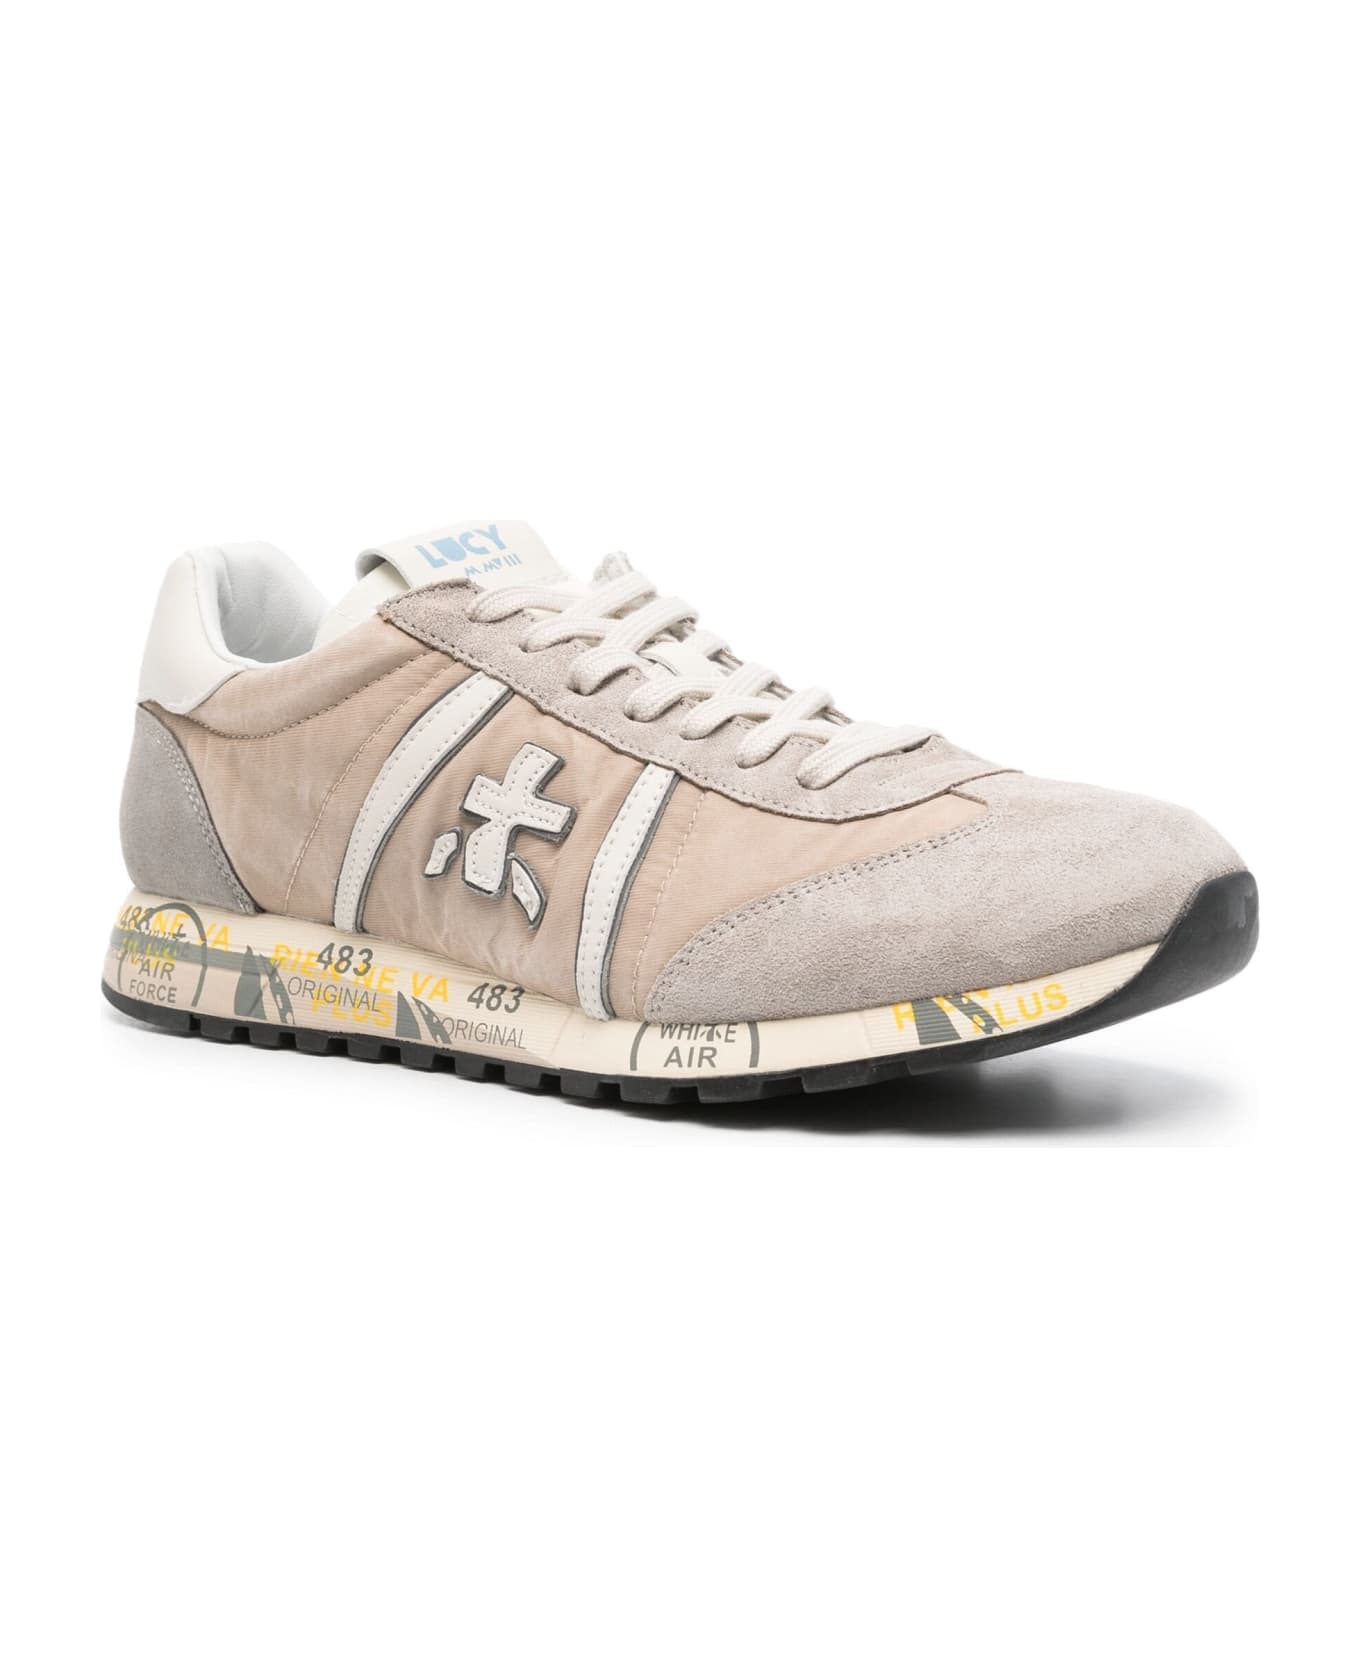 Premiata Lucy 6600 Sneakers - Brown スニーカー